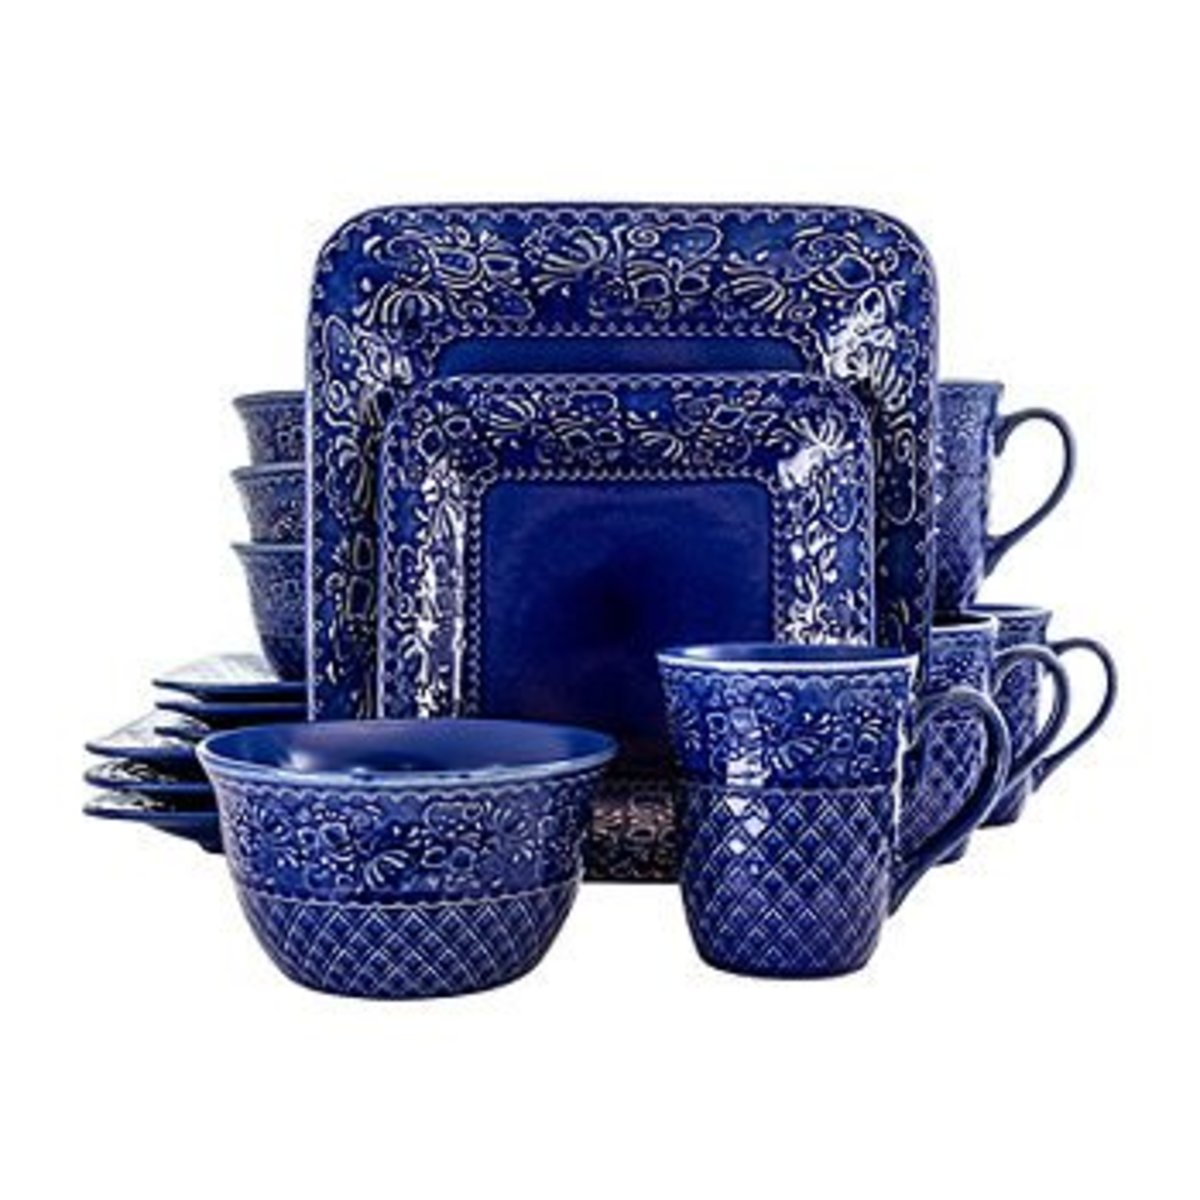 Dishware Dinner sets and Where to Find the Best Deals?